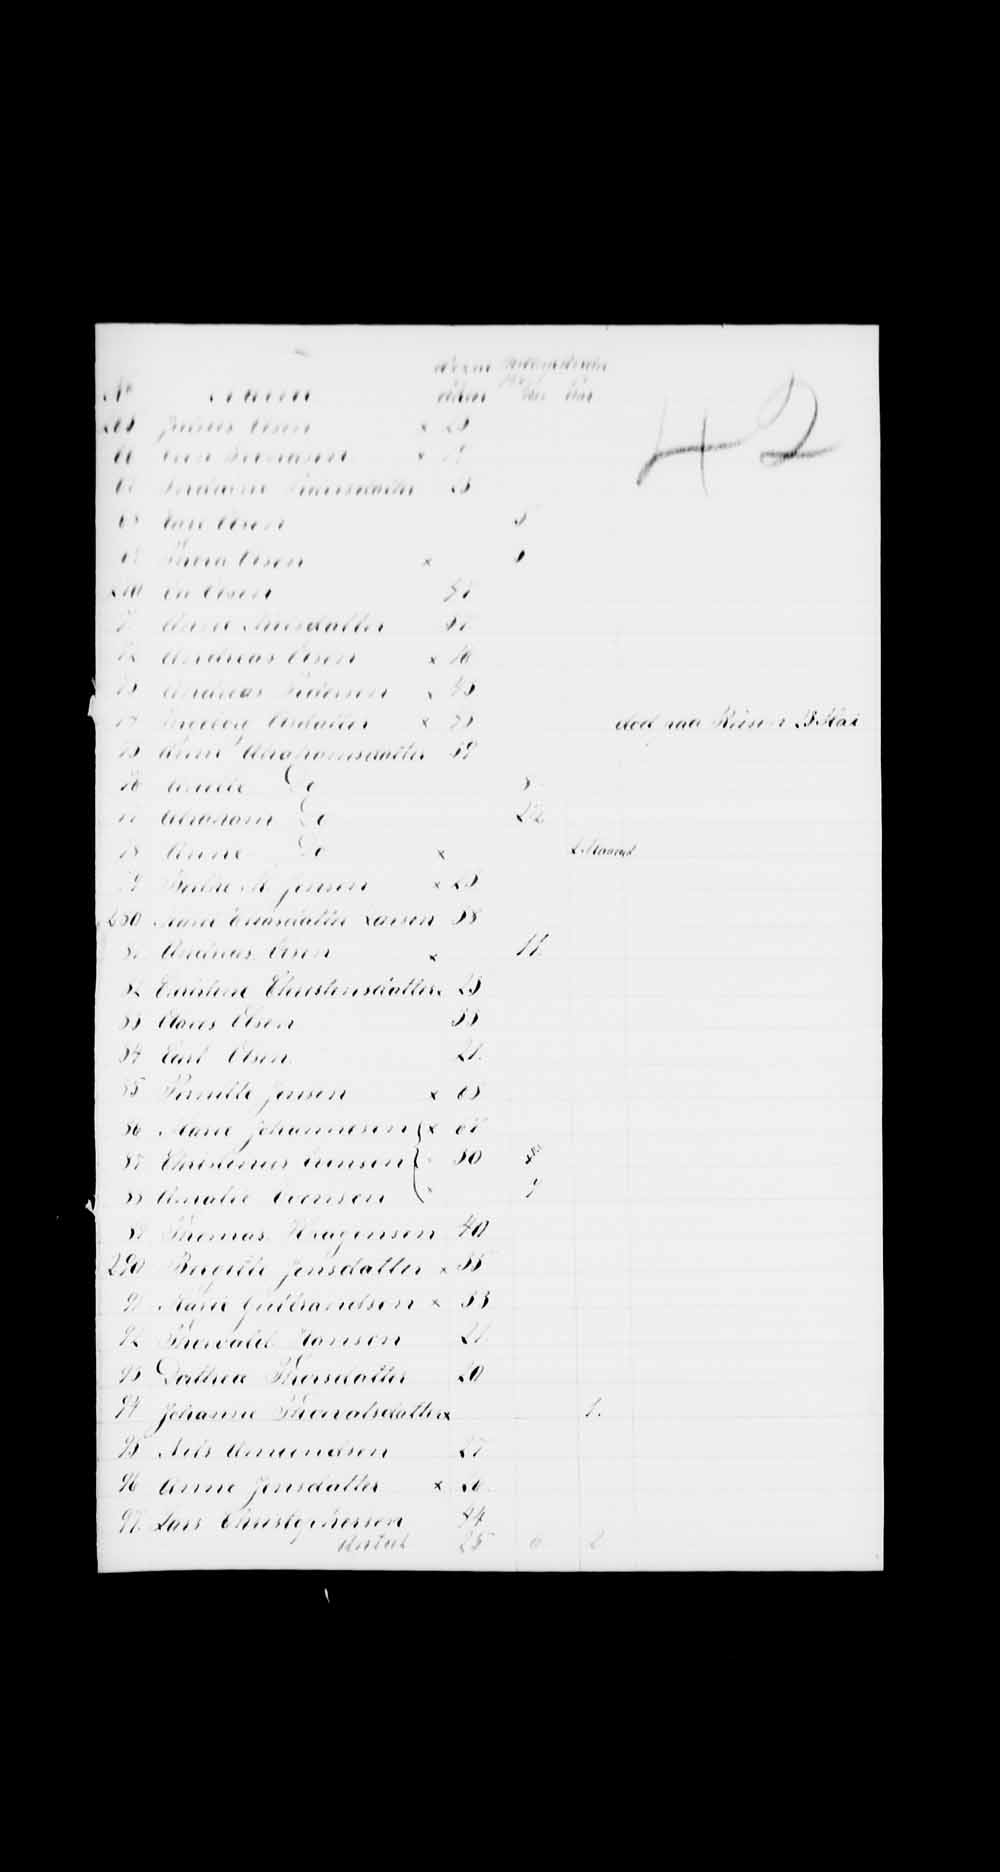 Digitized page of Passenger Lists for Image No.: e003530325